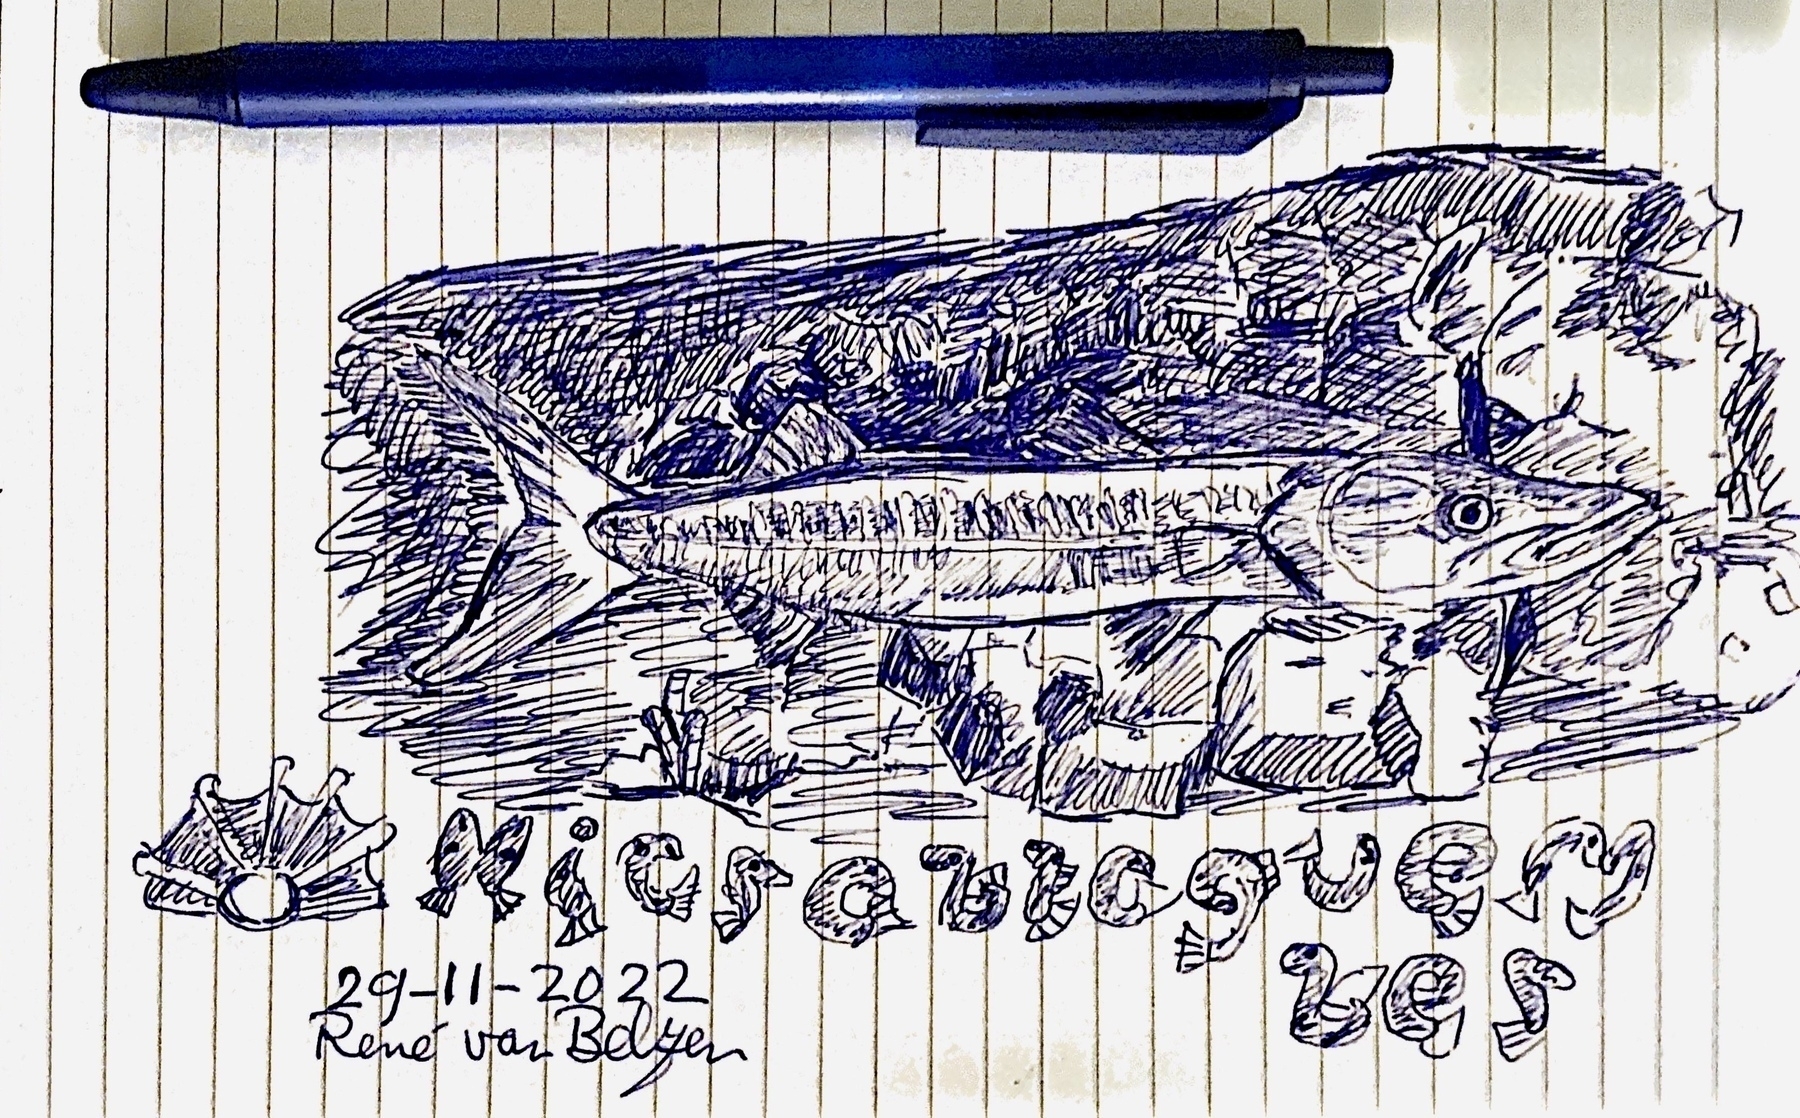 ballpoint pen sketch of a barracuda fish in its environment